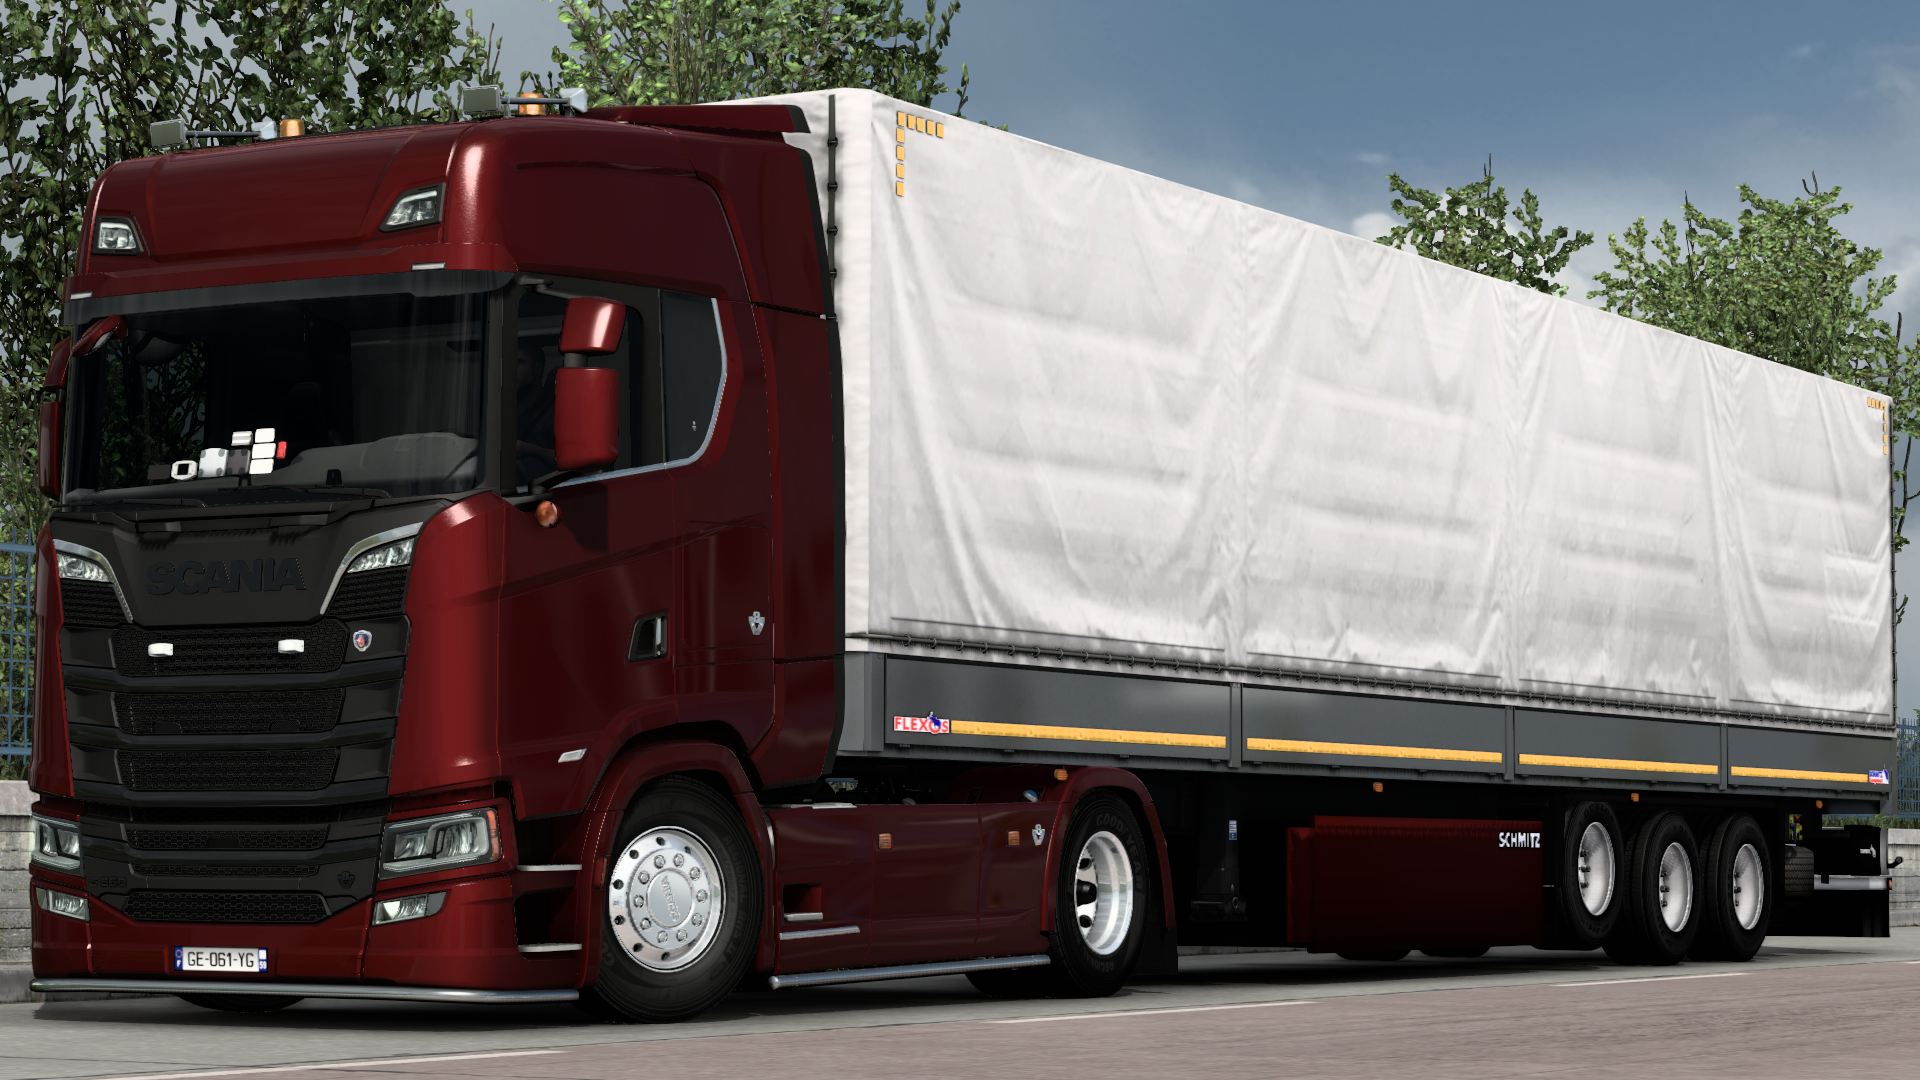 ets2_20230608_222920_00.png